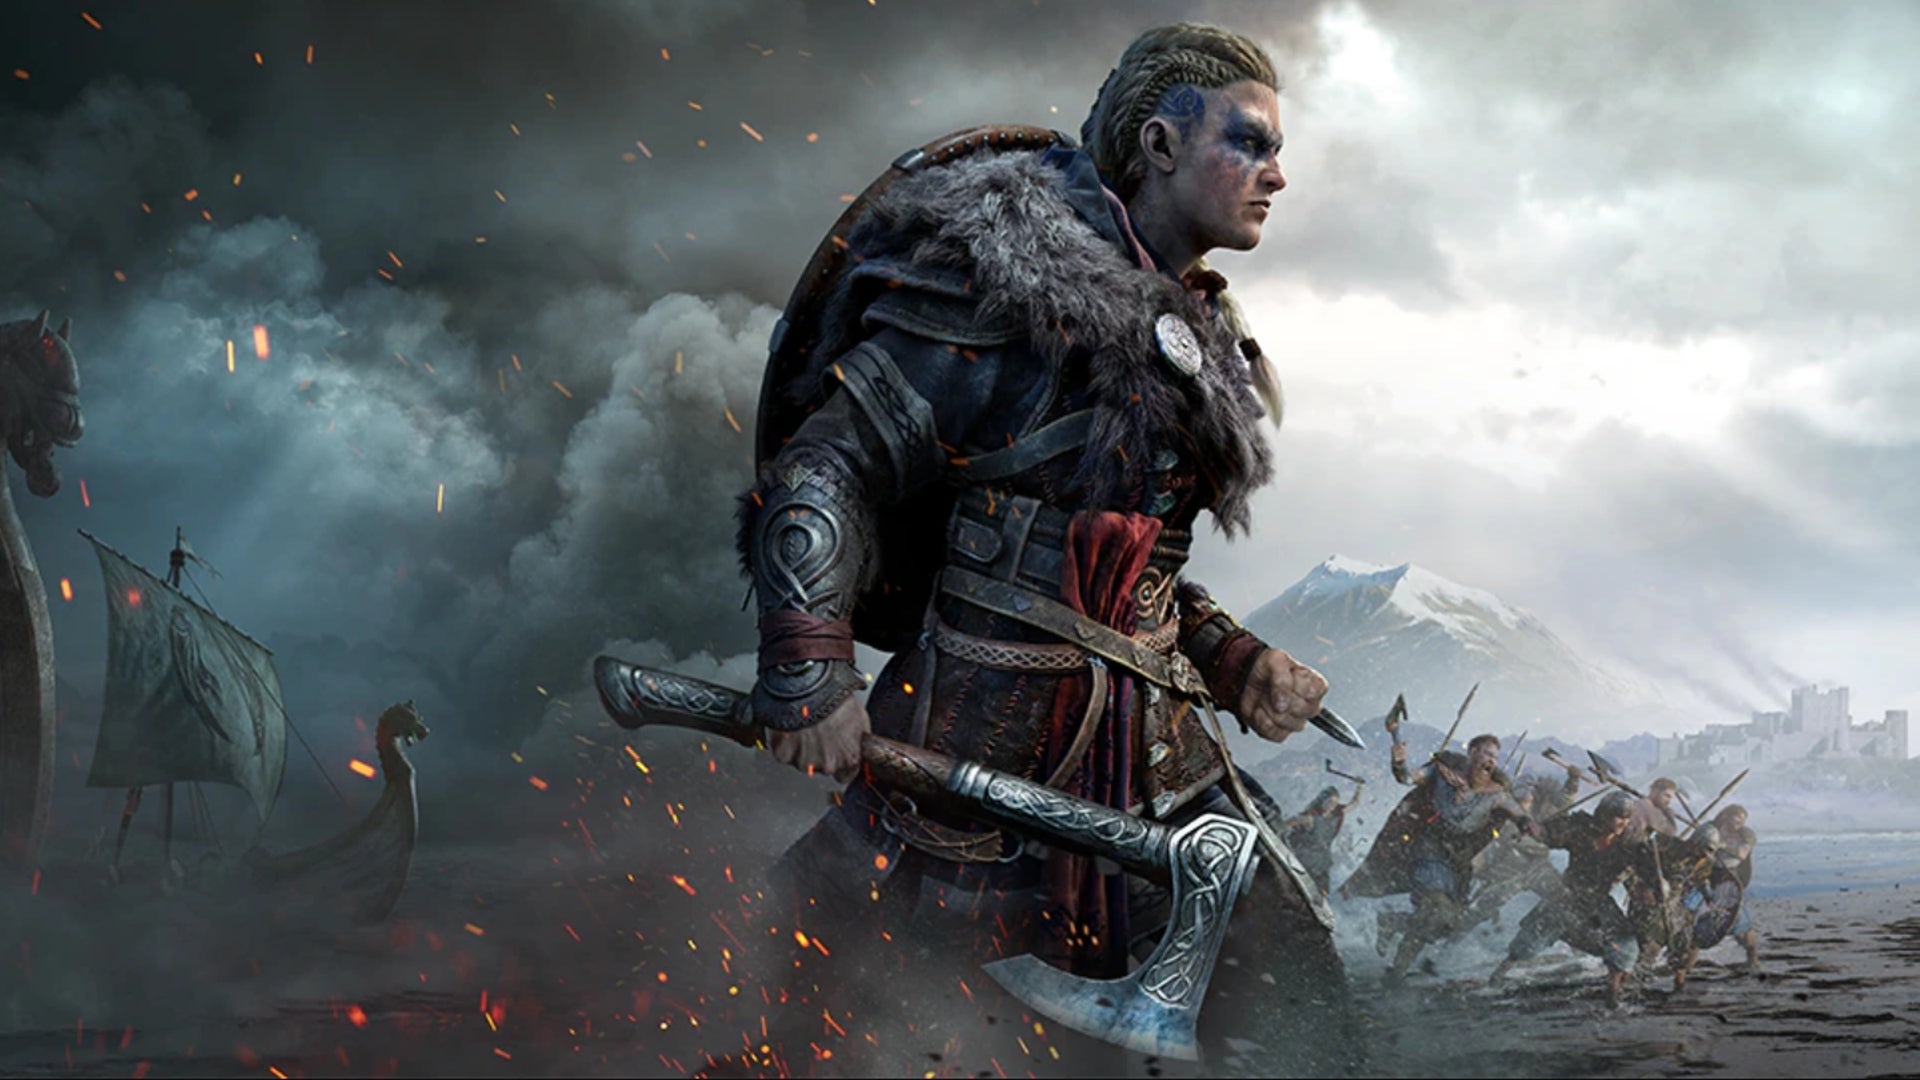 Key art from Assassin's Creed Valhalla showing Eivor holding an axe